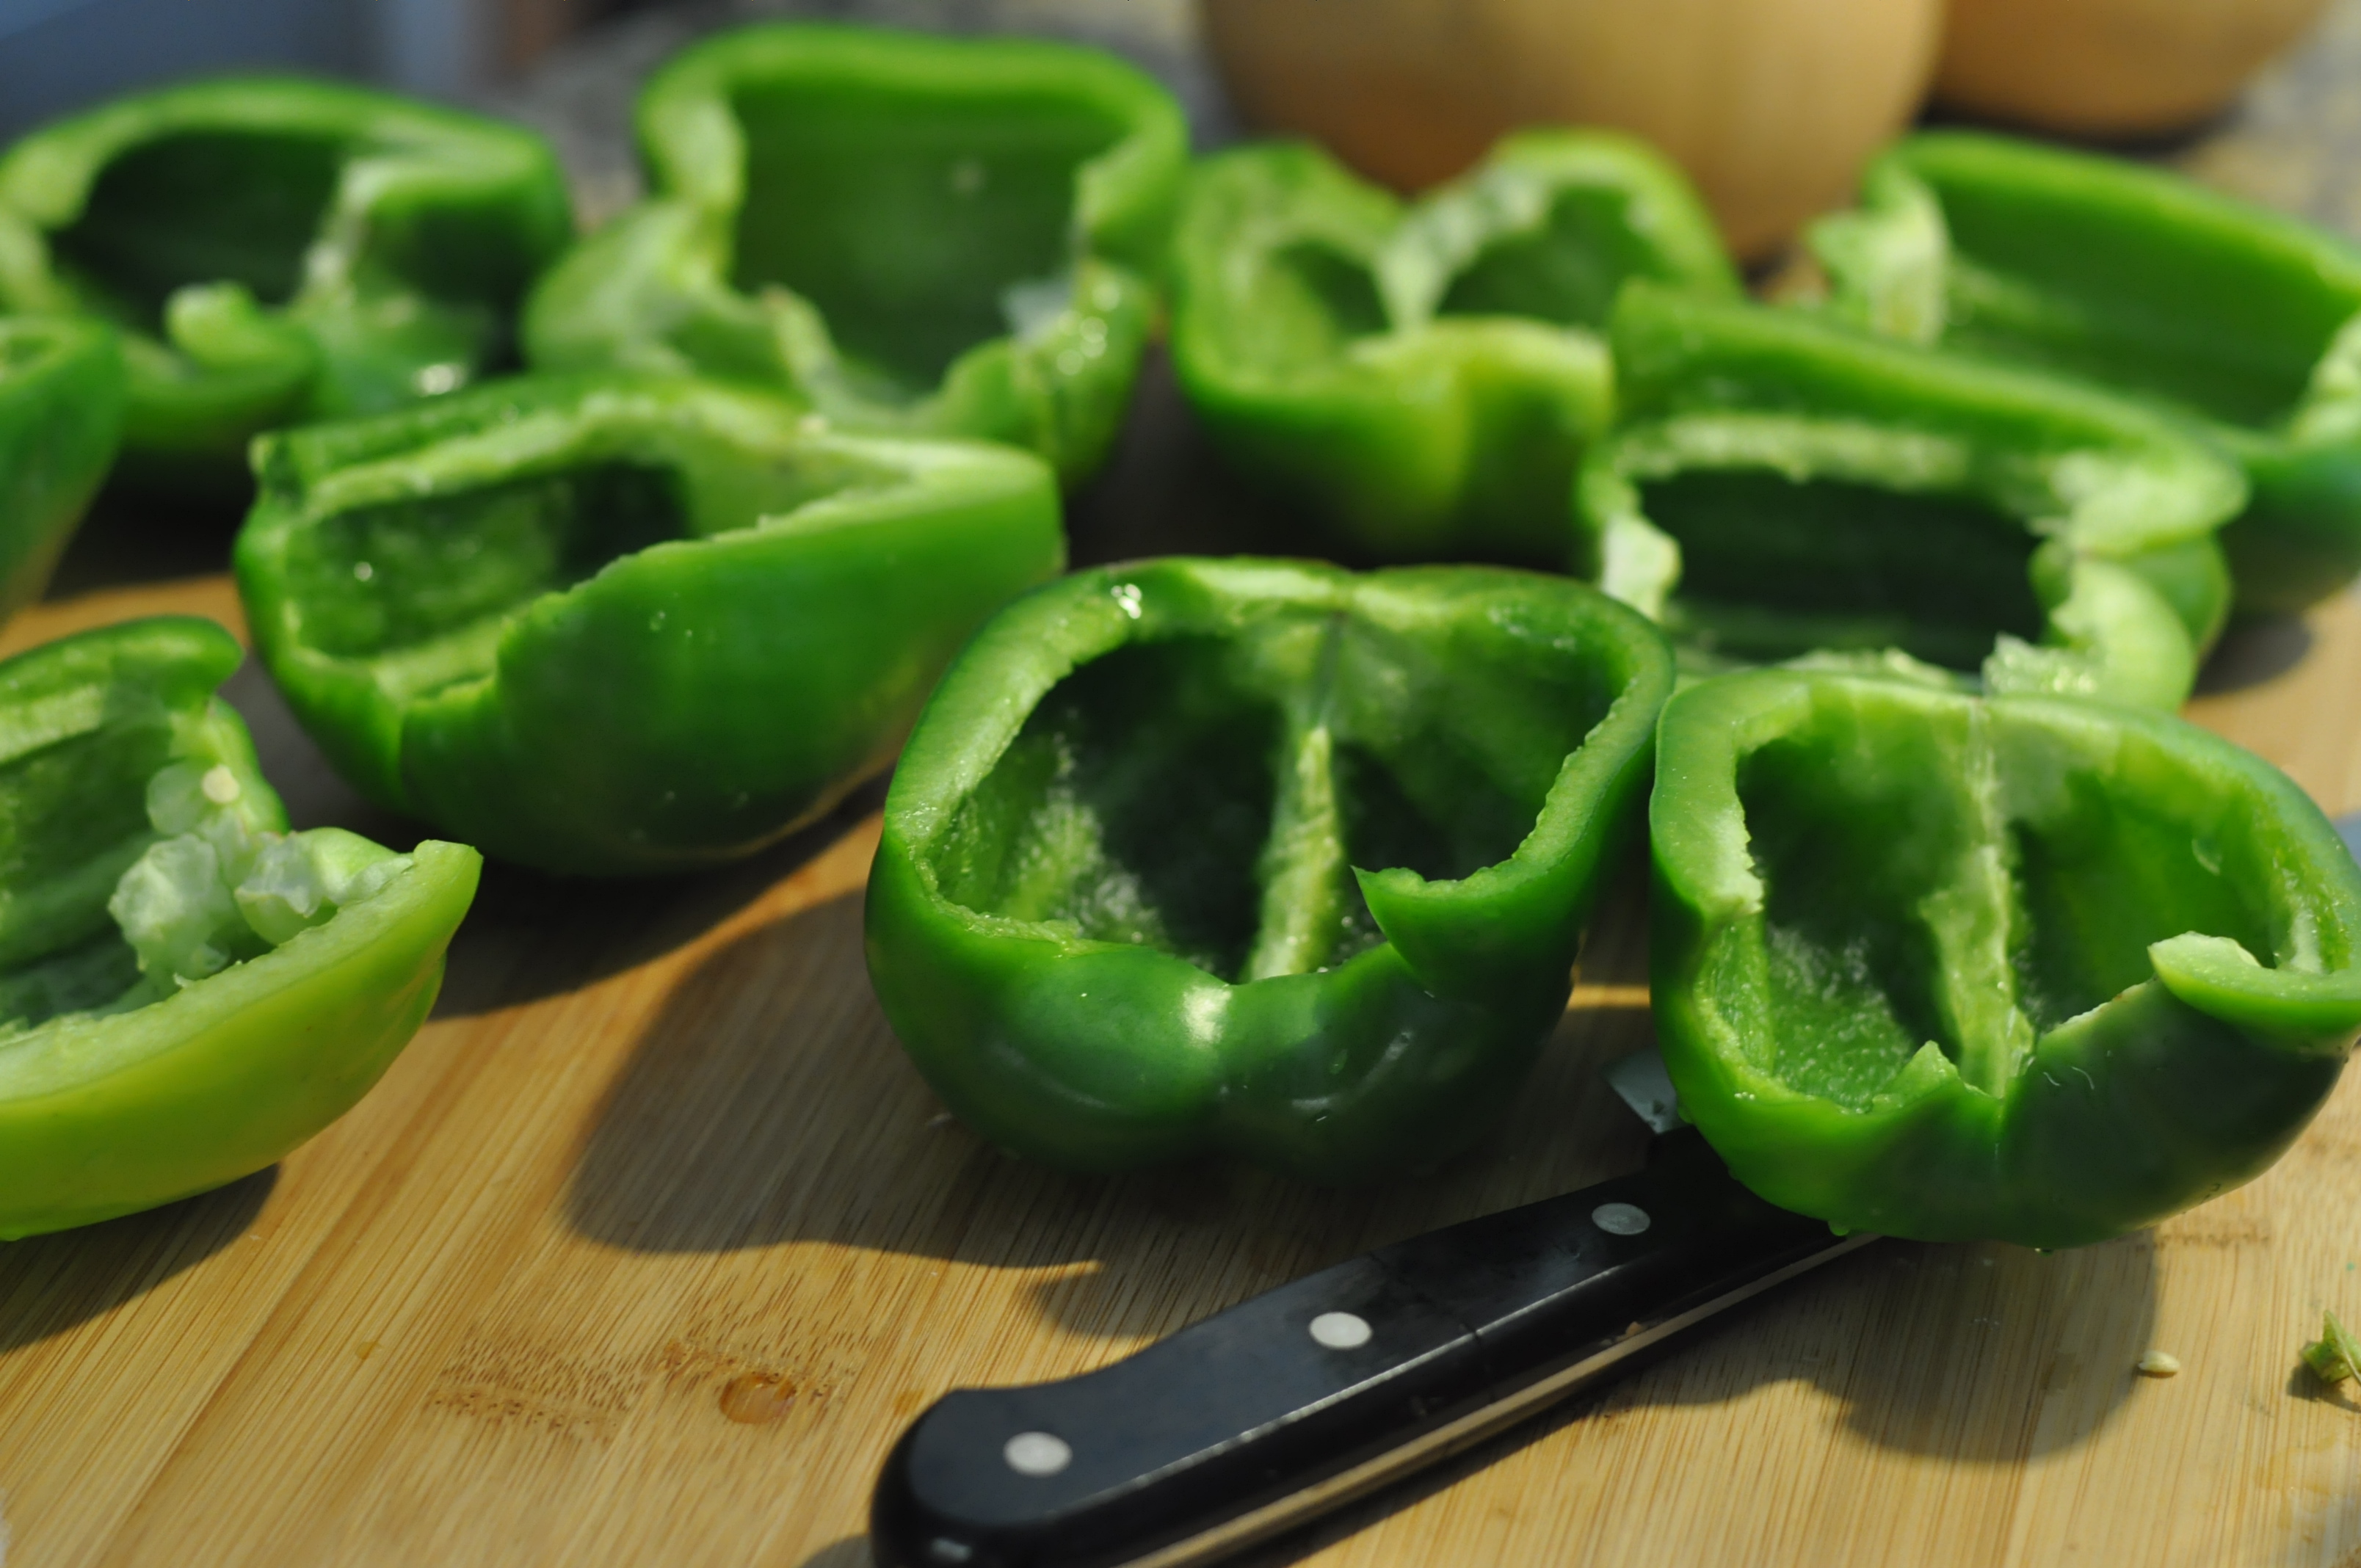 Cutting green peppers 